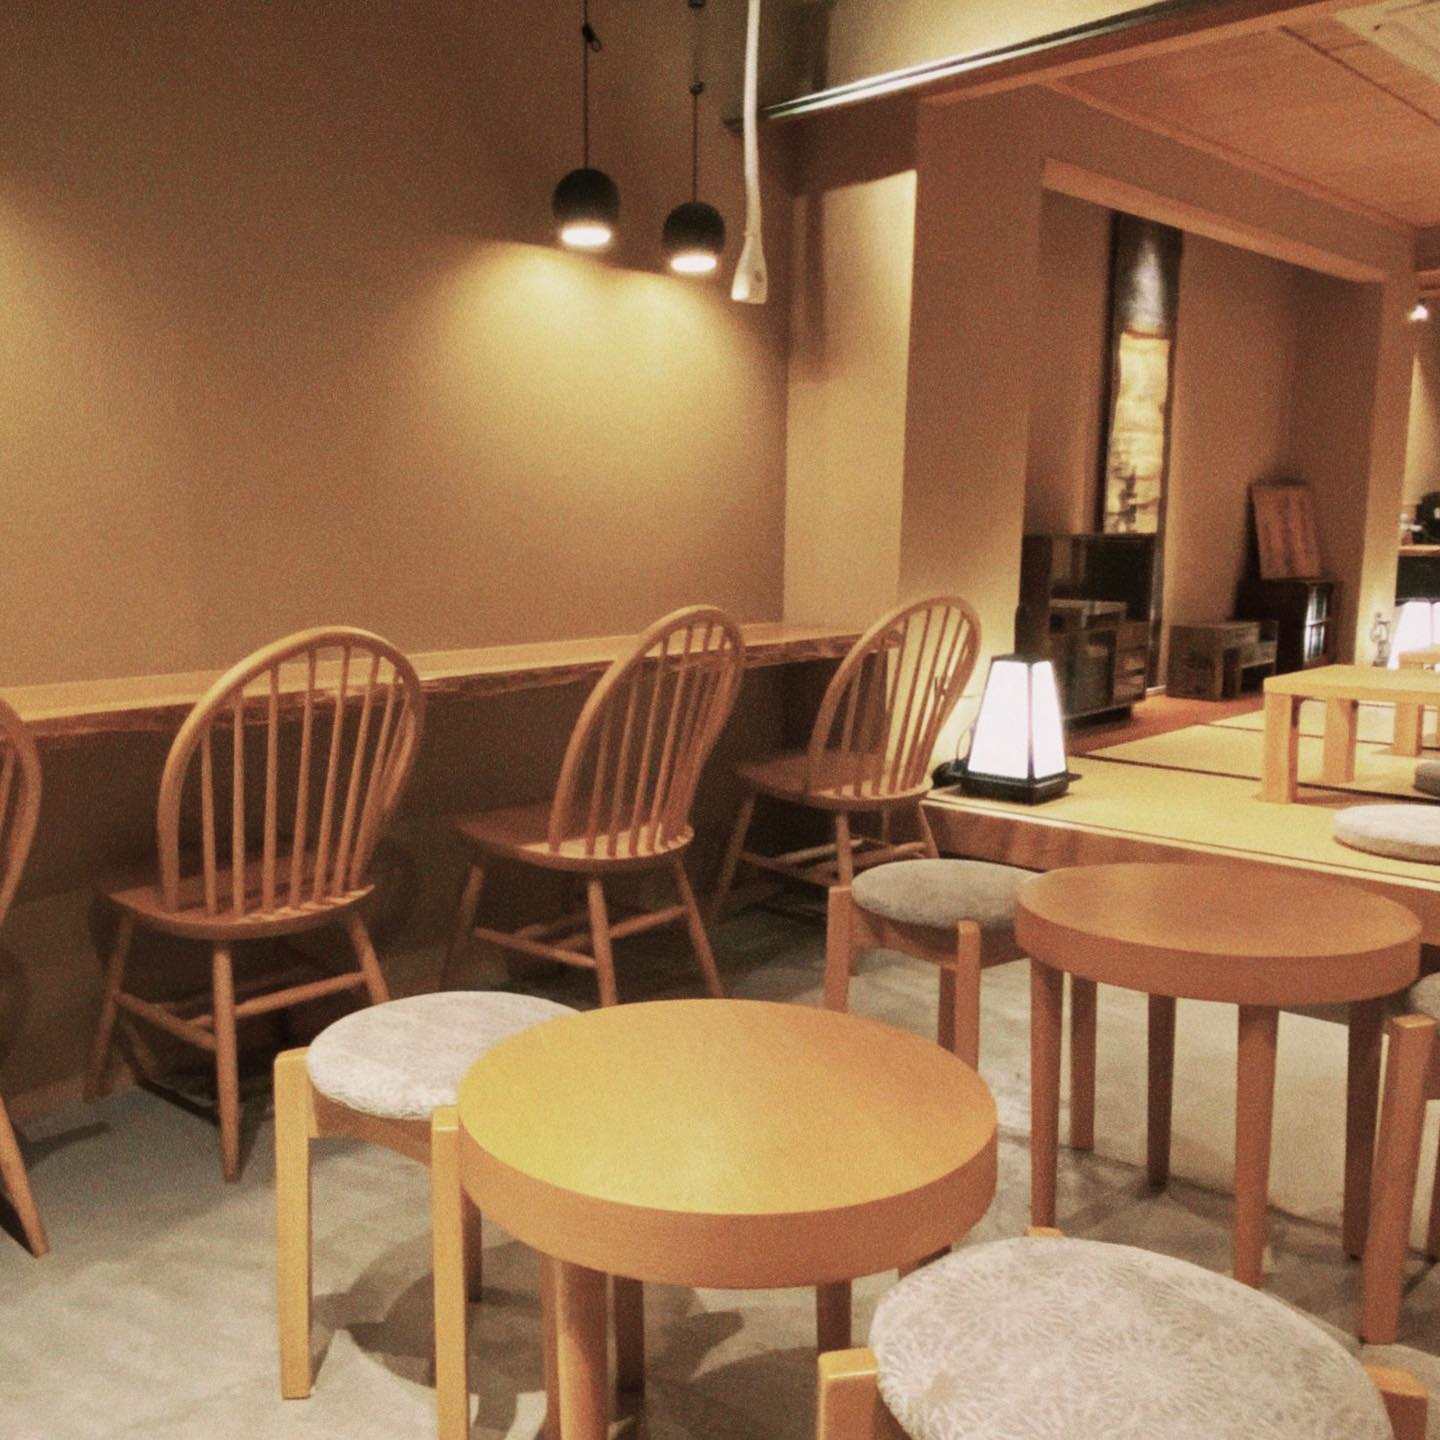 We have a lounge space for guests to chat and work with each other.#hotelzizikyotogion #guesthotel #kyotohostel #kyoto #gion 